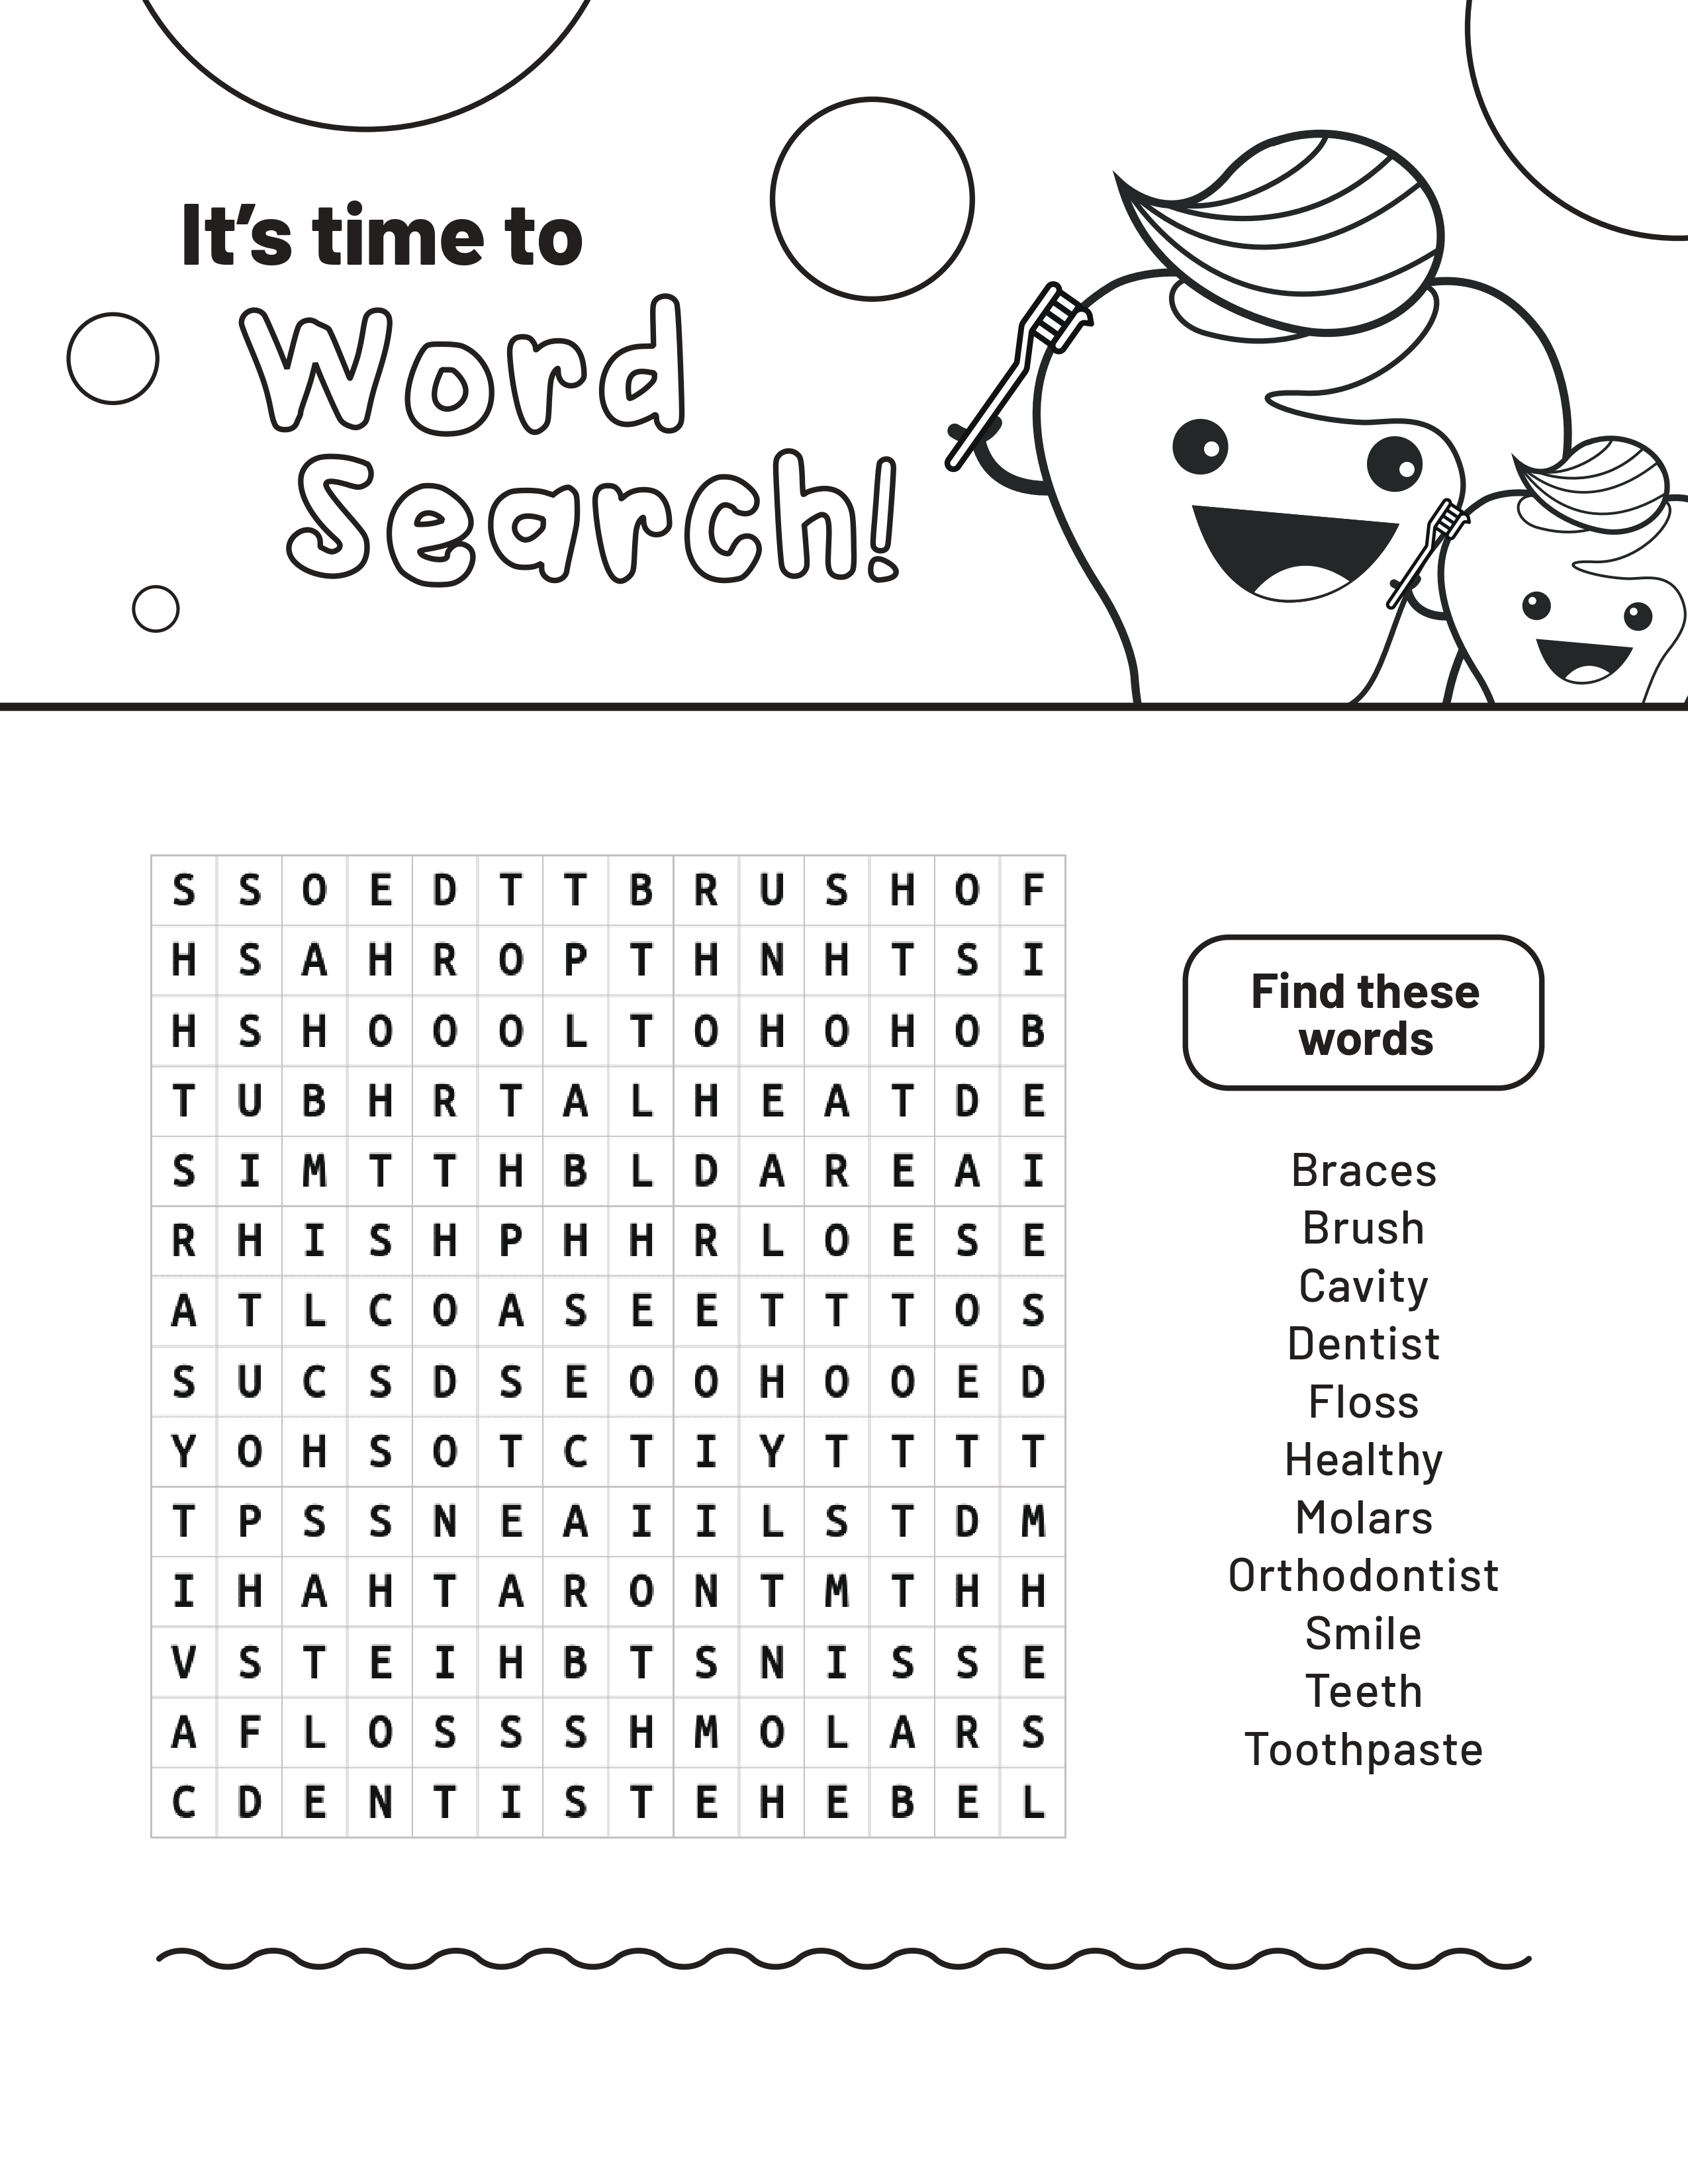 Time to Smile -Word Search